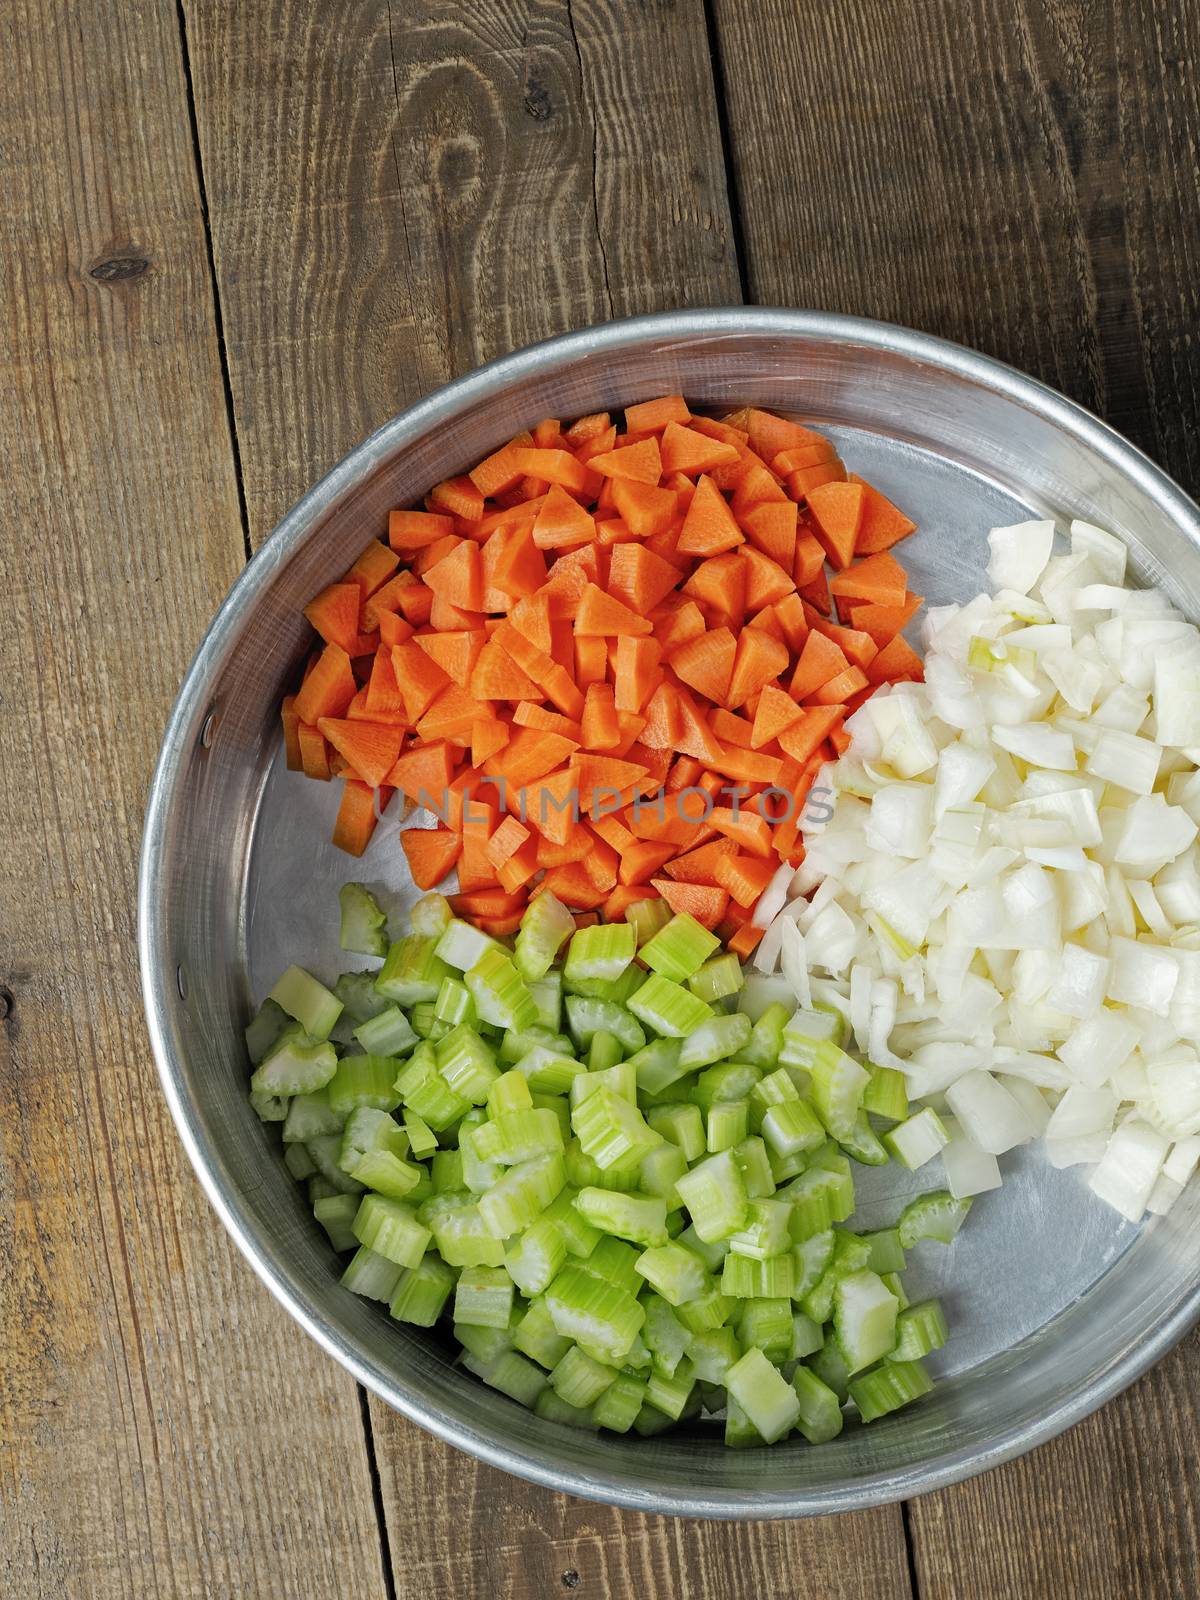 rustic diced carrot onion and celery by zkruger